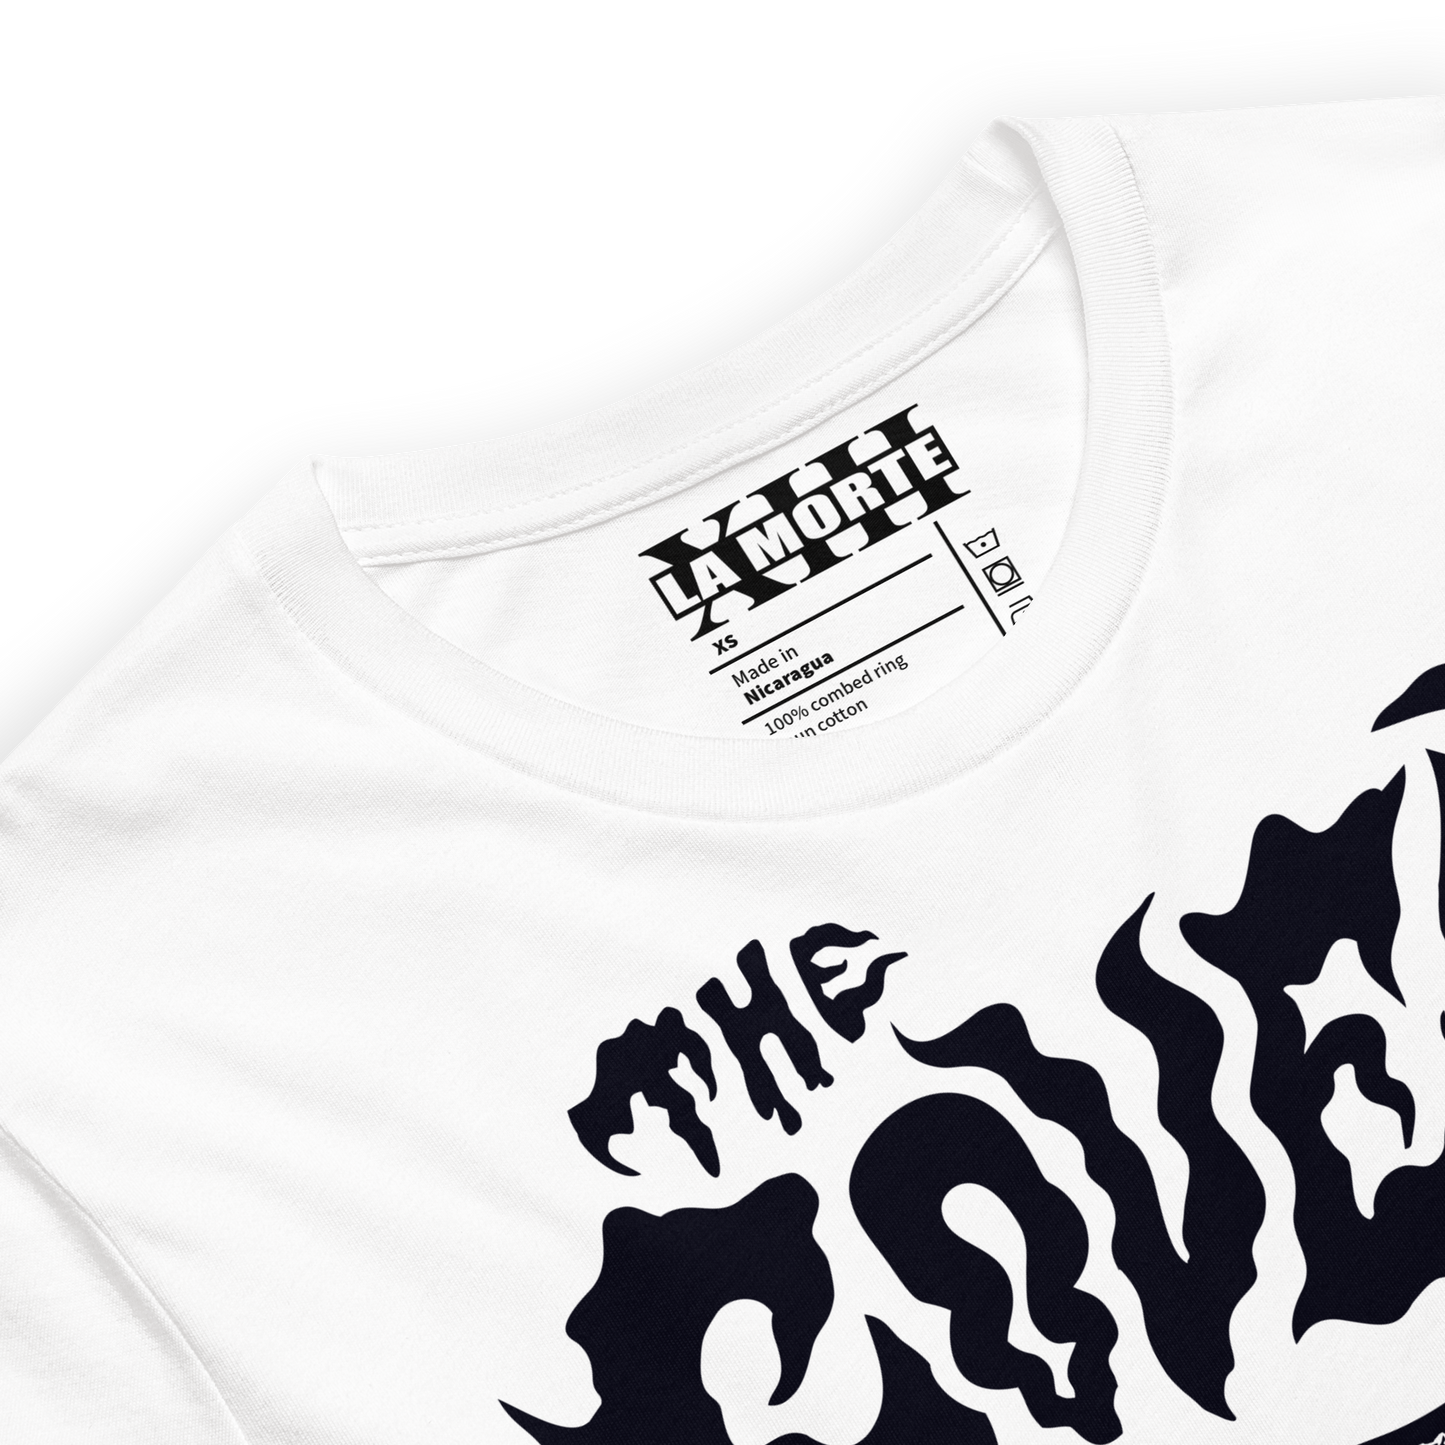 The Coven • Unisex T-Shirt • The Inverted Collection